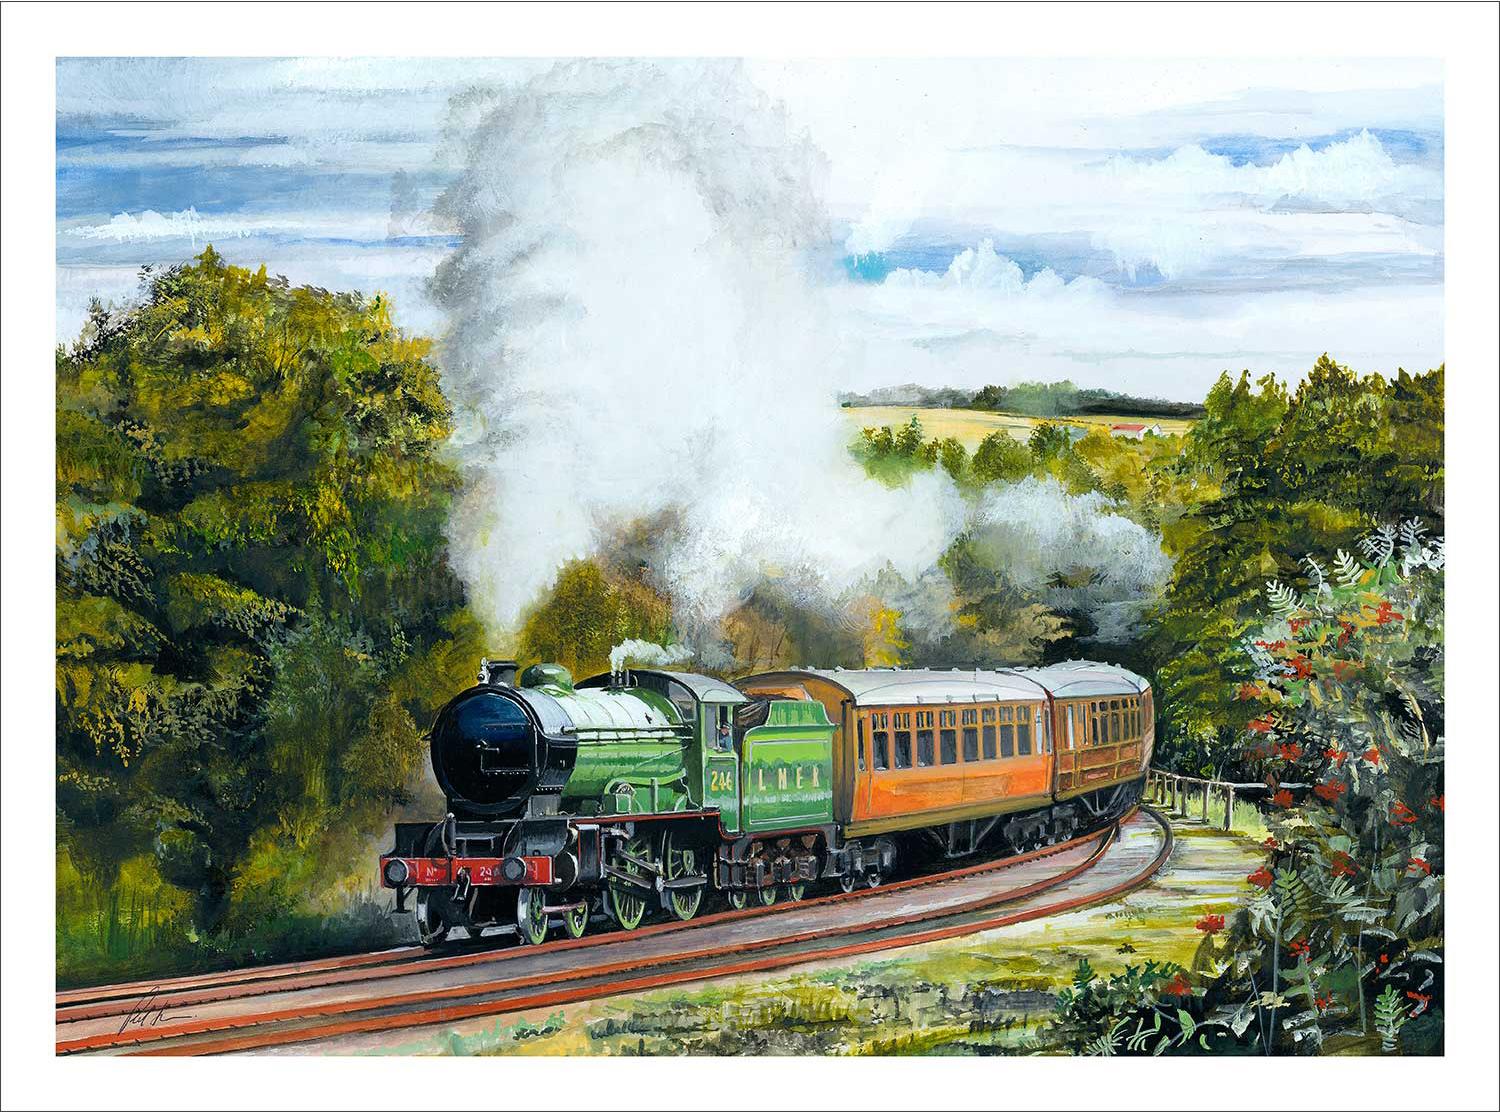 LNER D49 No 246 approaching Manuel on the Bo’ness & Kinneil Railway Art Print from an original painted by artist Rod Harrison